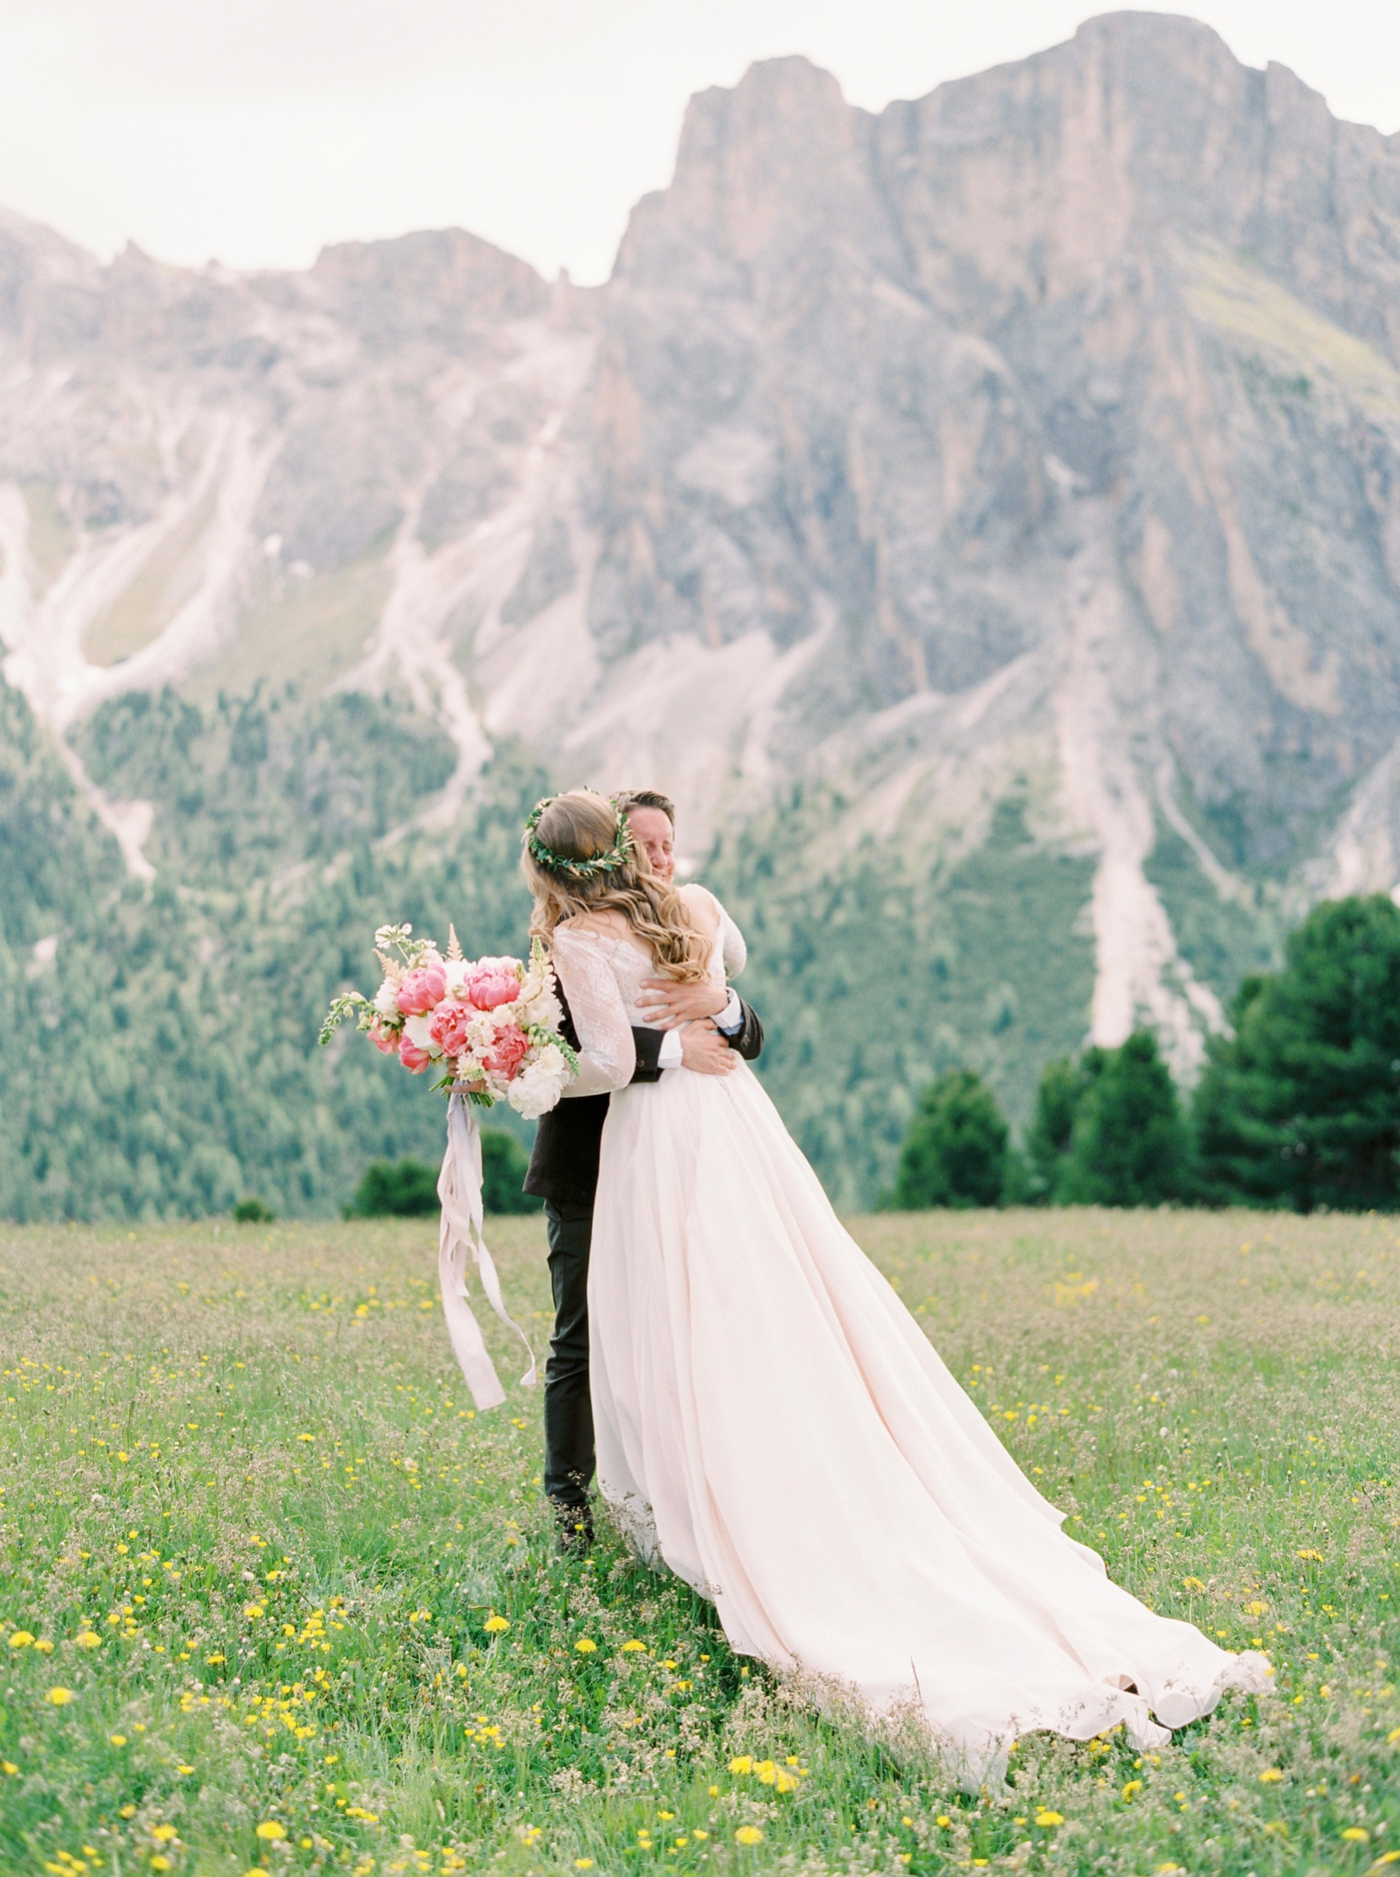 Italy wedding photographers | Dolomites mountain top wedding | pink and white peony bouquet | long sleeve flowing wedding dress | Bride and groom portrait first look | justine milton fine art film ...